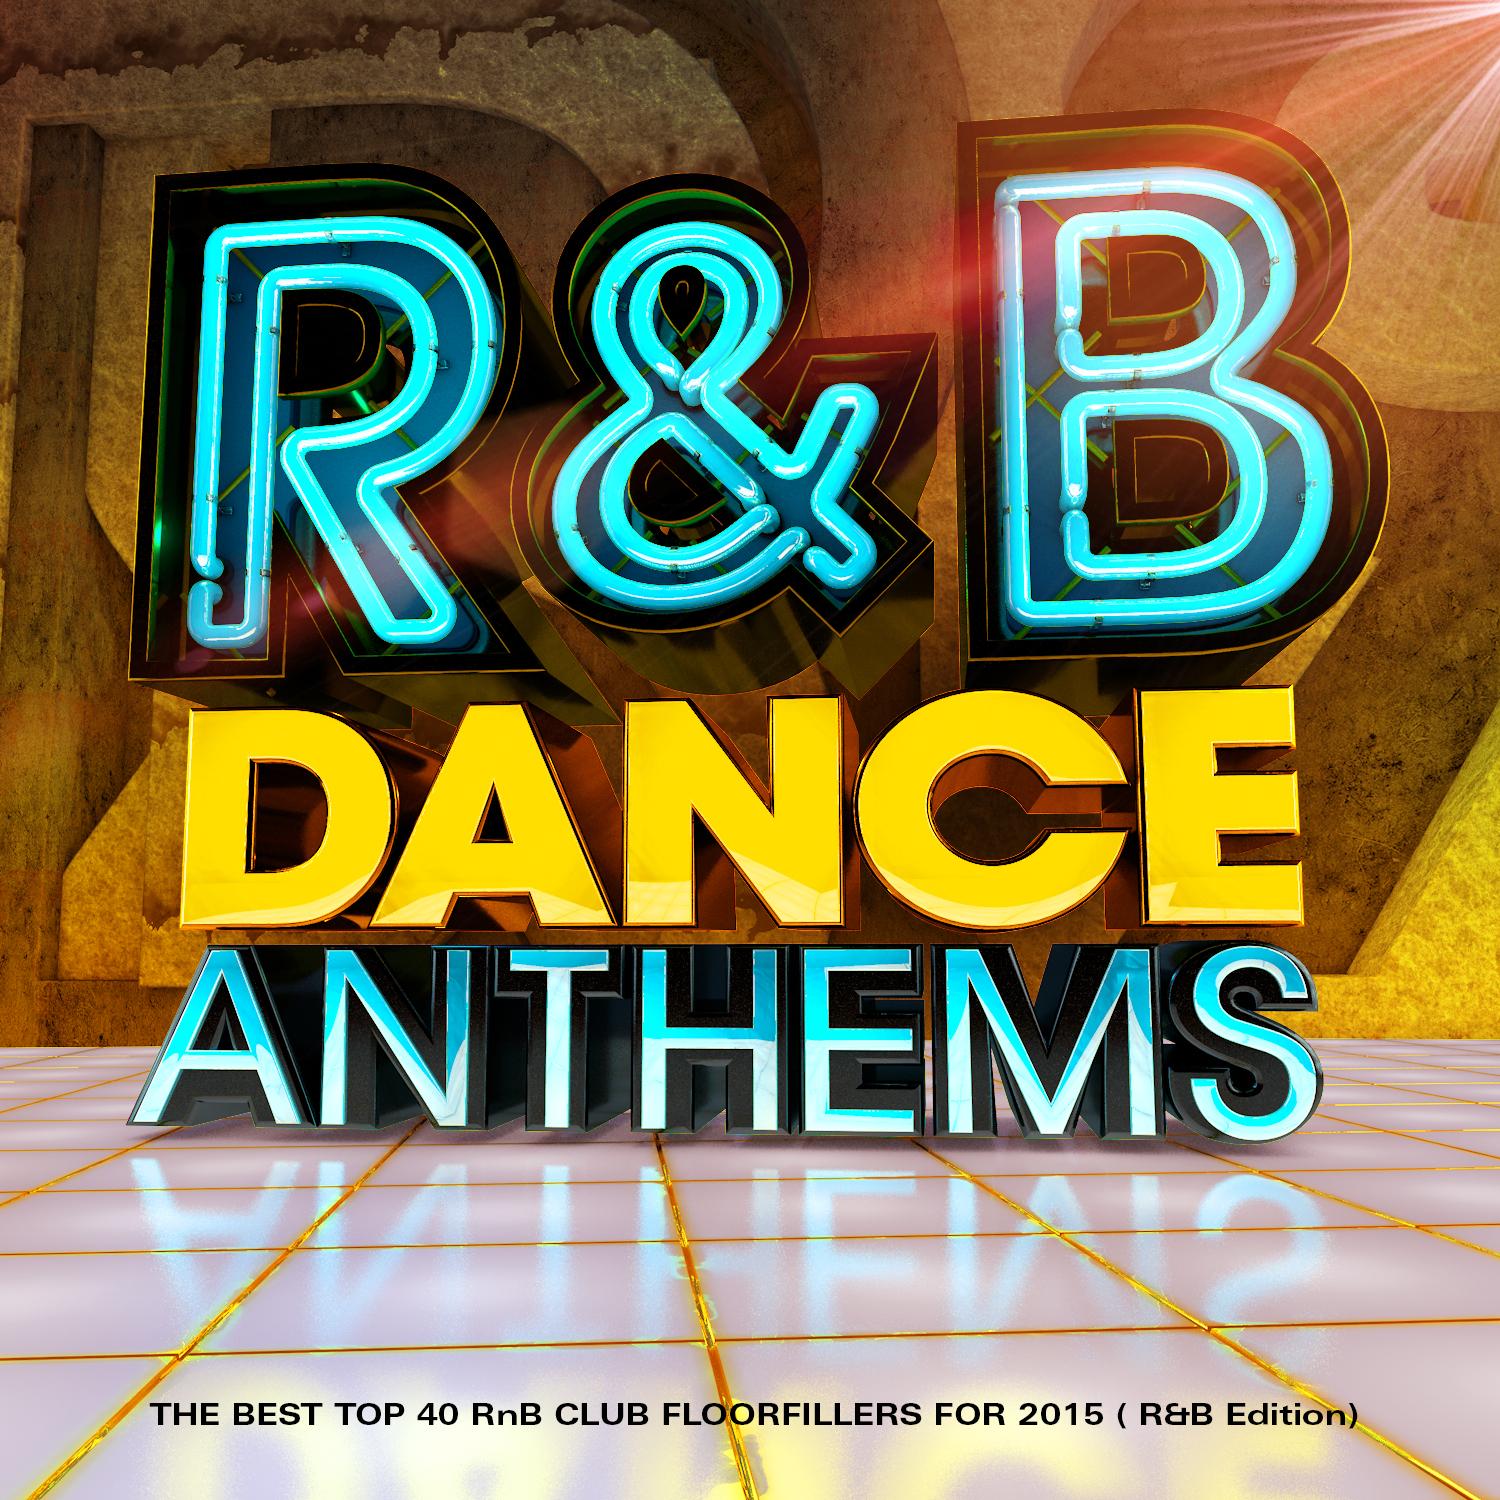 R & B Dance Anthems - The Best Top 40 Rnb Club Floorfillers for 2015 (R and B Edition)